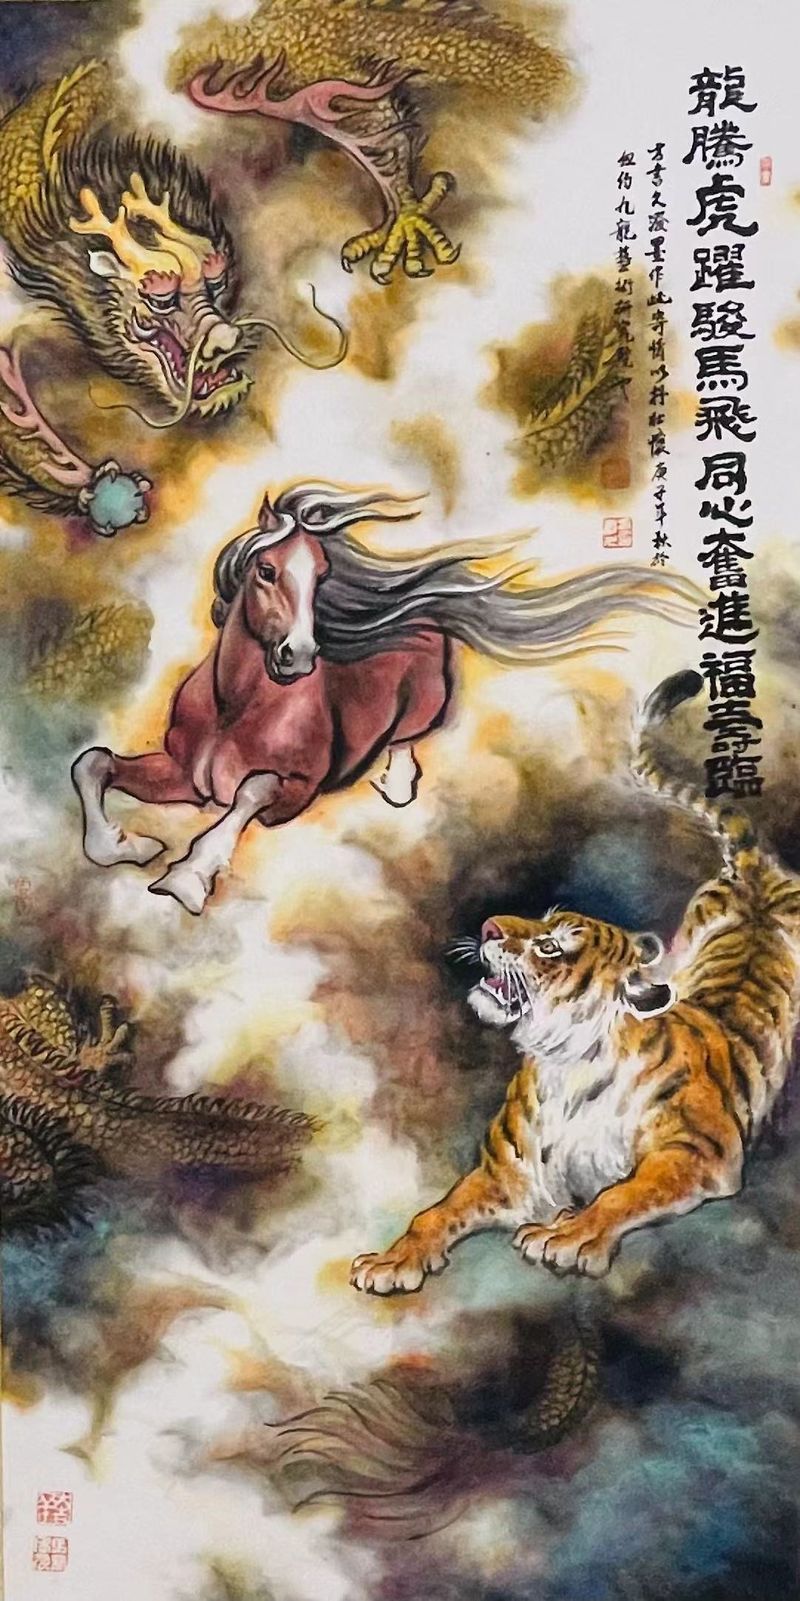 A painting of a dragon, horse, and tiger